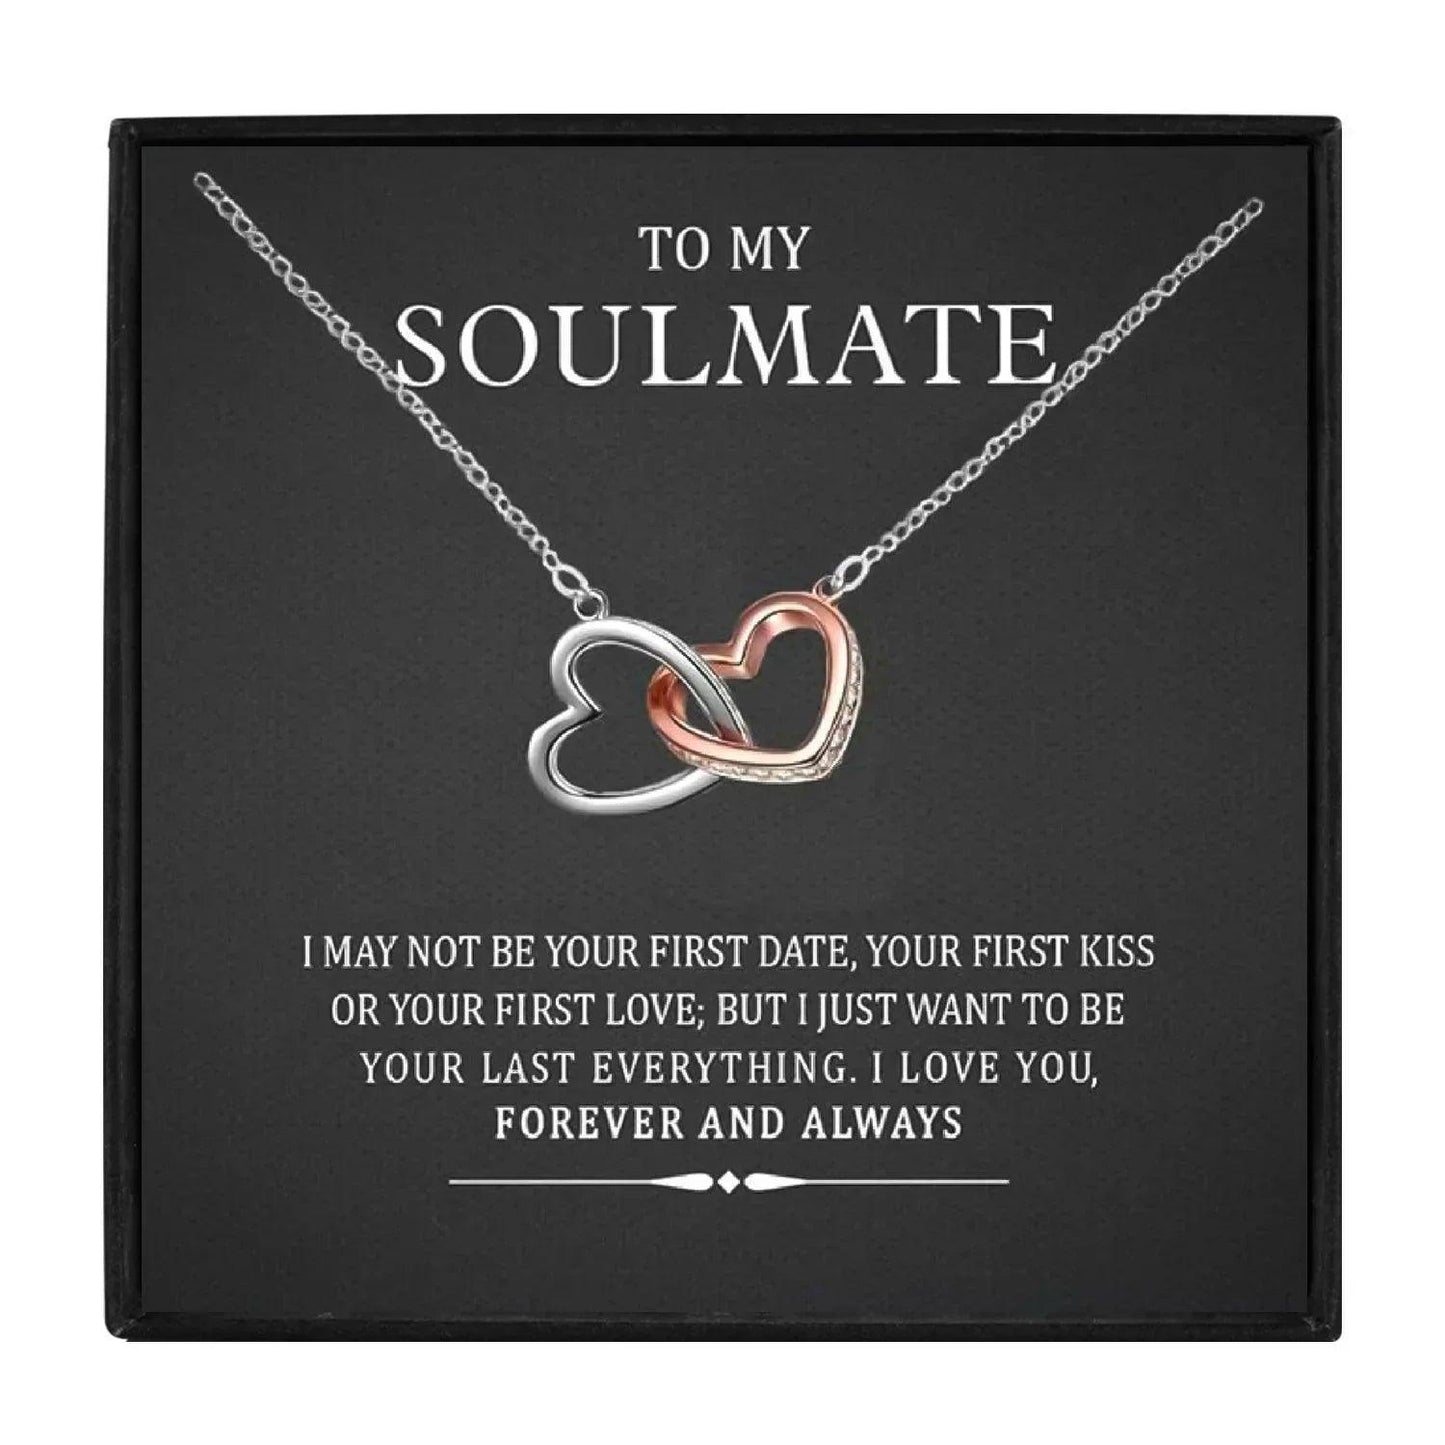 To My Wife Double Heart Pendant Necklace From Husband in 2023 | To My Wife Double Heart Pendant Necklace From Husband - undefined | wife gift, wife gift ideas | From Hunny Life | hunnylife.com